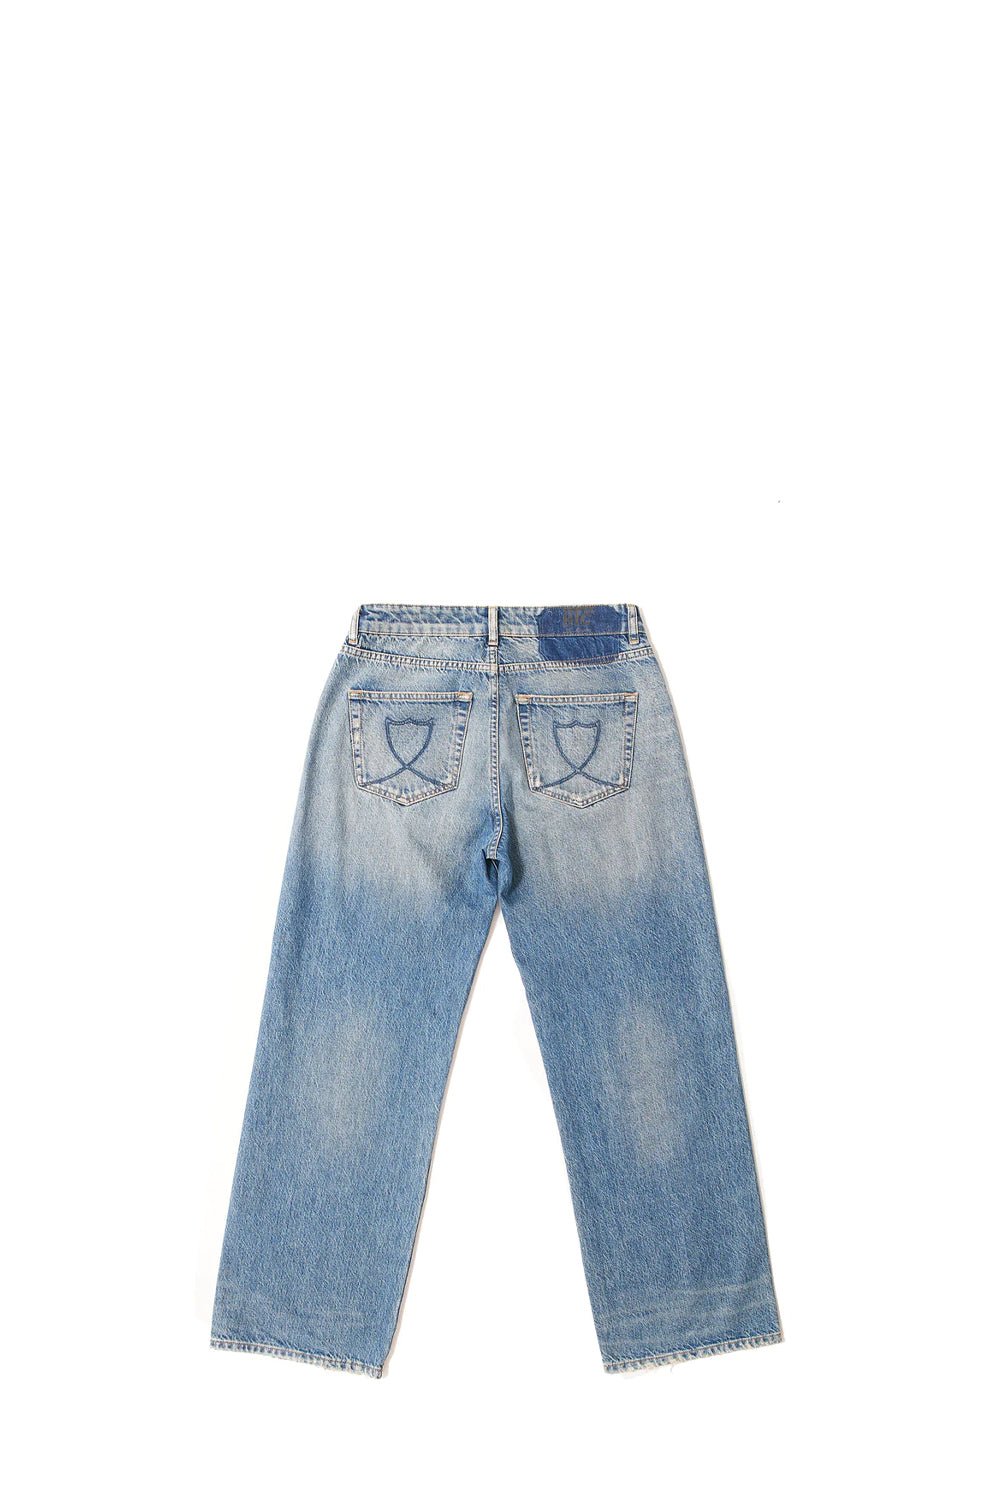 VICTORIA VINTAGE 5 pockets blue jeans, zip and button closure. Boyfriend fit. 100% cotton. Made in Italy. HTC LOS ANGELES